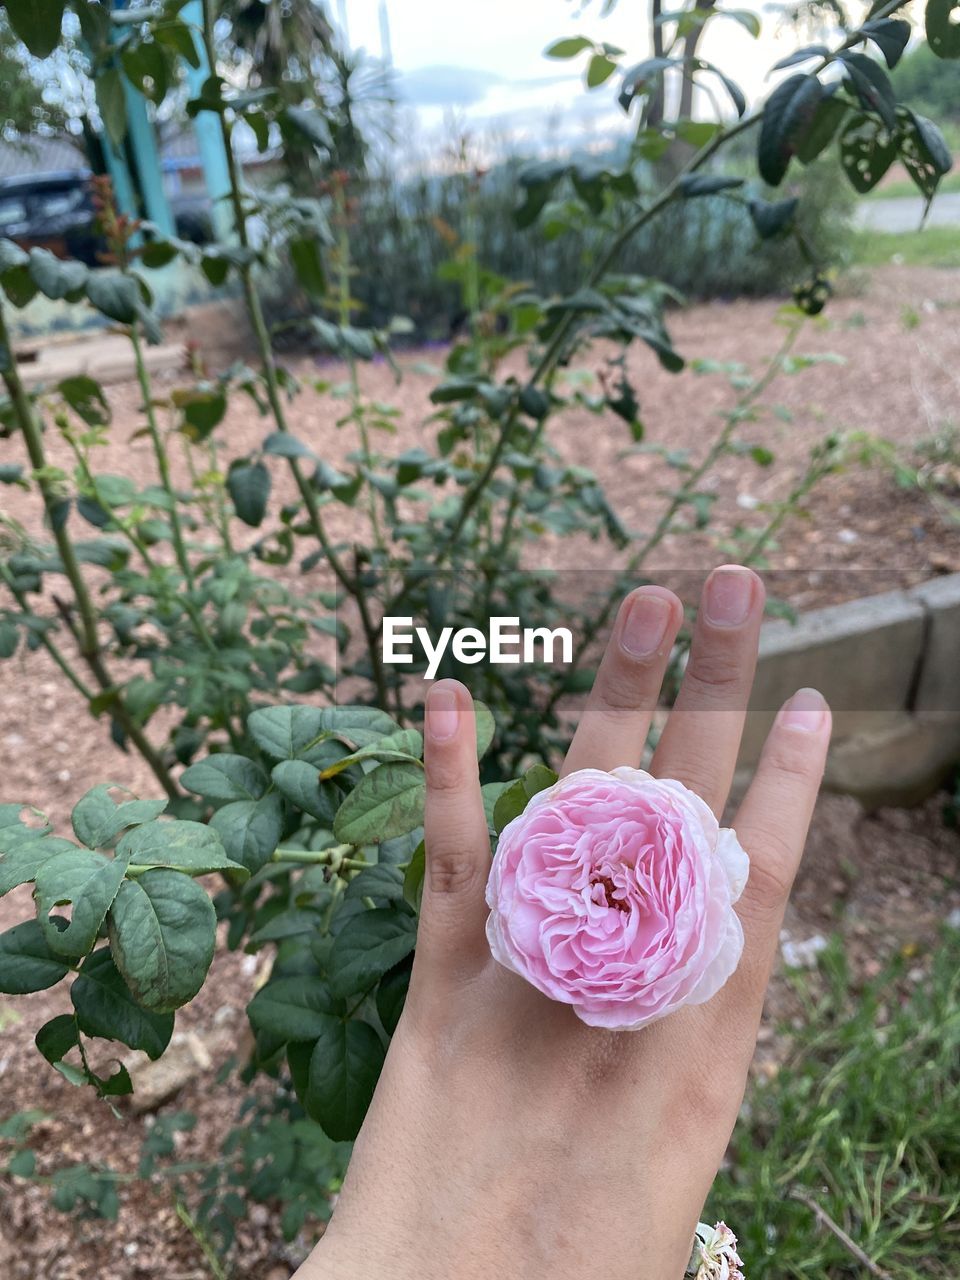 hand, flower, plant, nature, one person, rose, flowering plant, holding, pink, freshness, growth, beauty in nature, day, adult, women, lifestyles, plant part, outdoors, leaf, spring, close-up, tree, focus on foreground, food, fragility, green, high angle view, food and drink, gardening